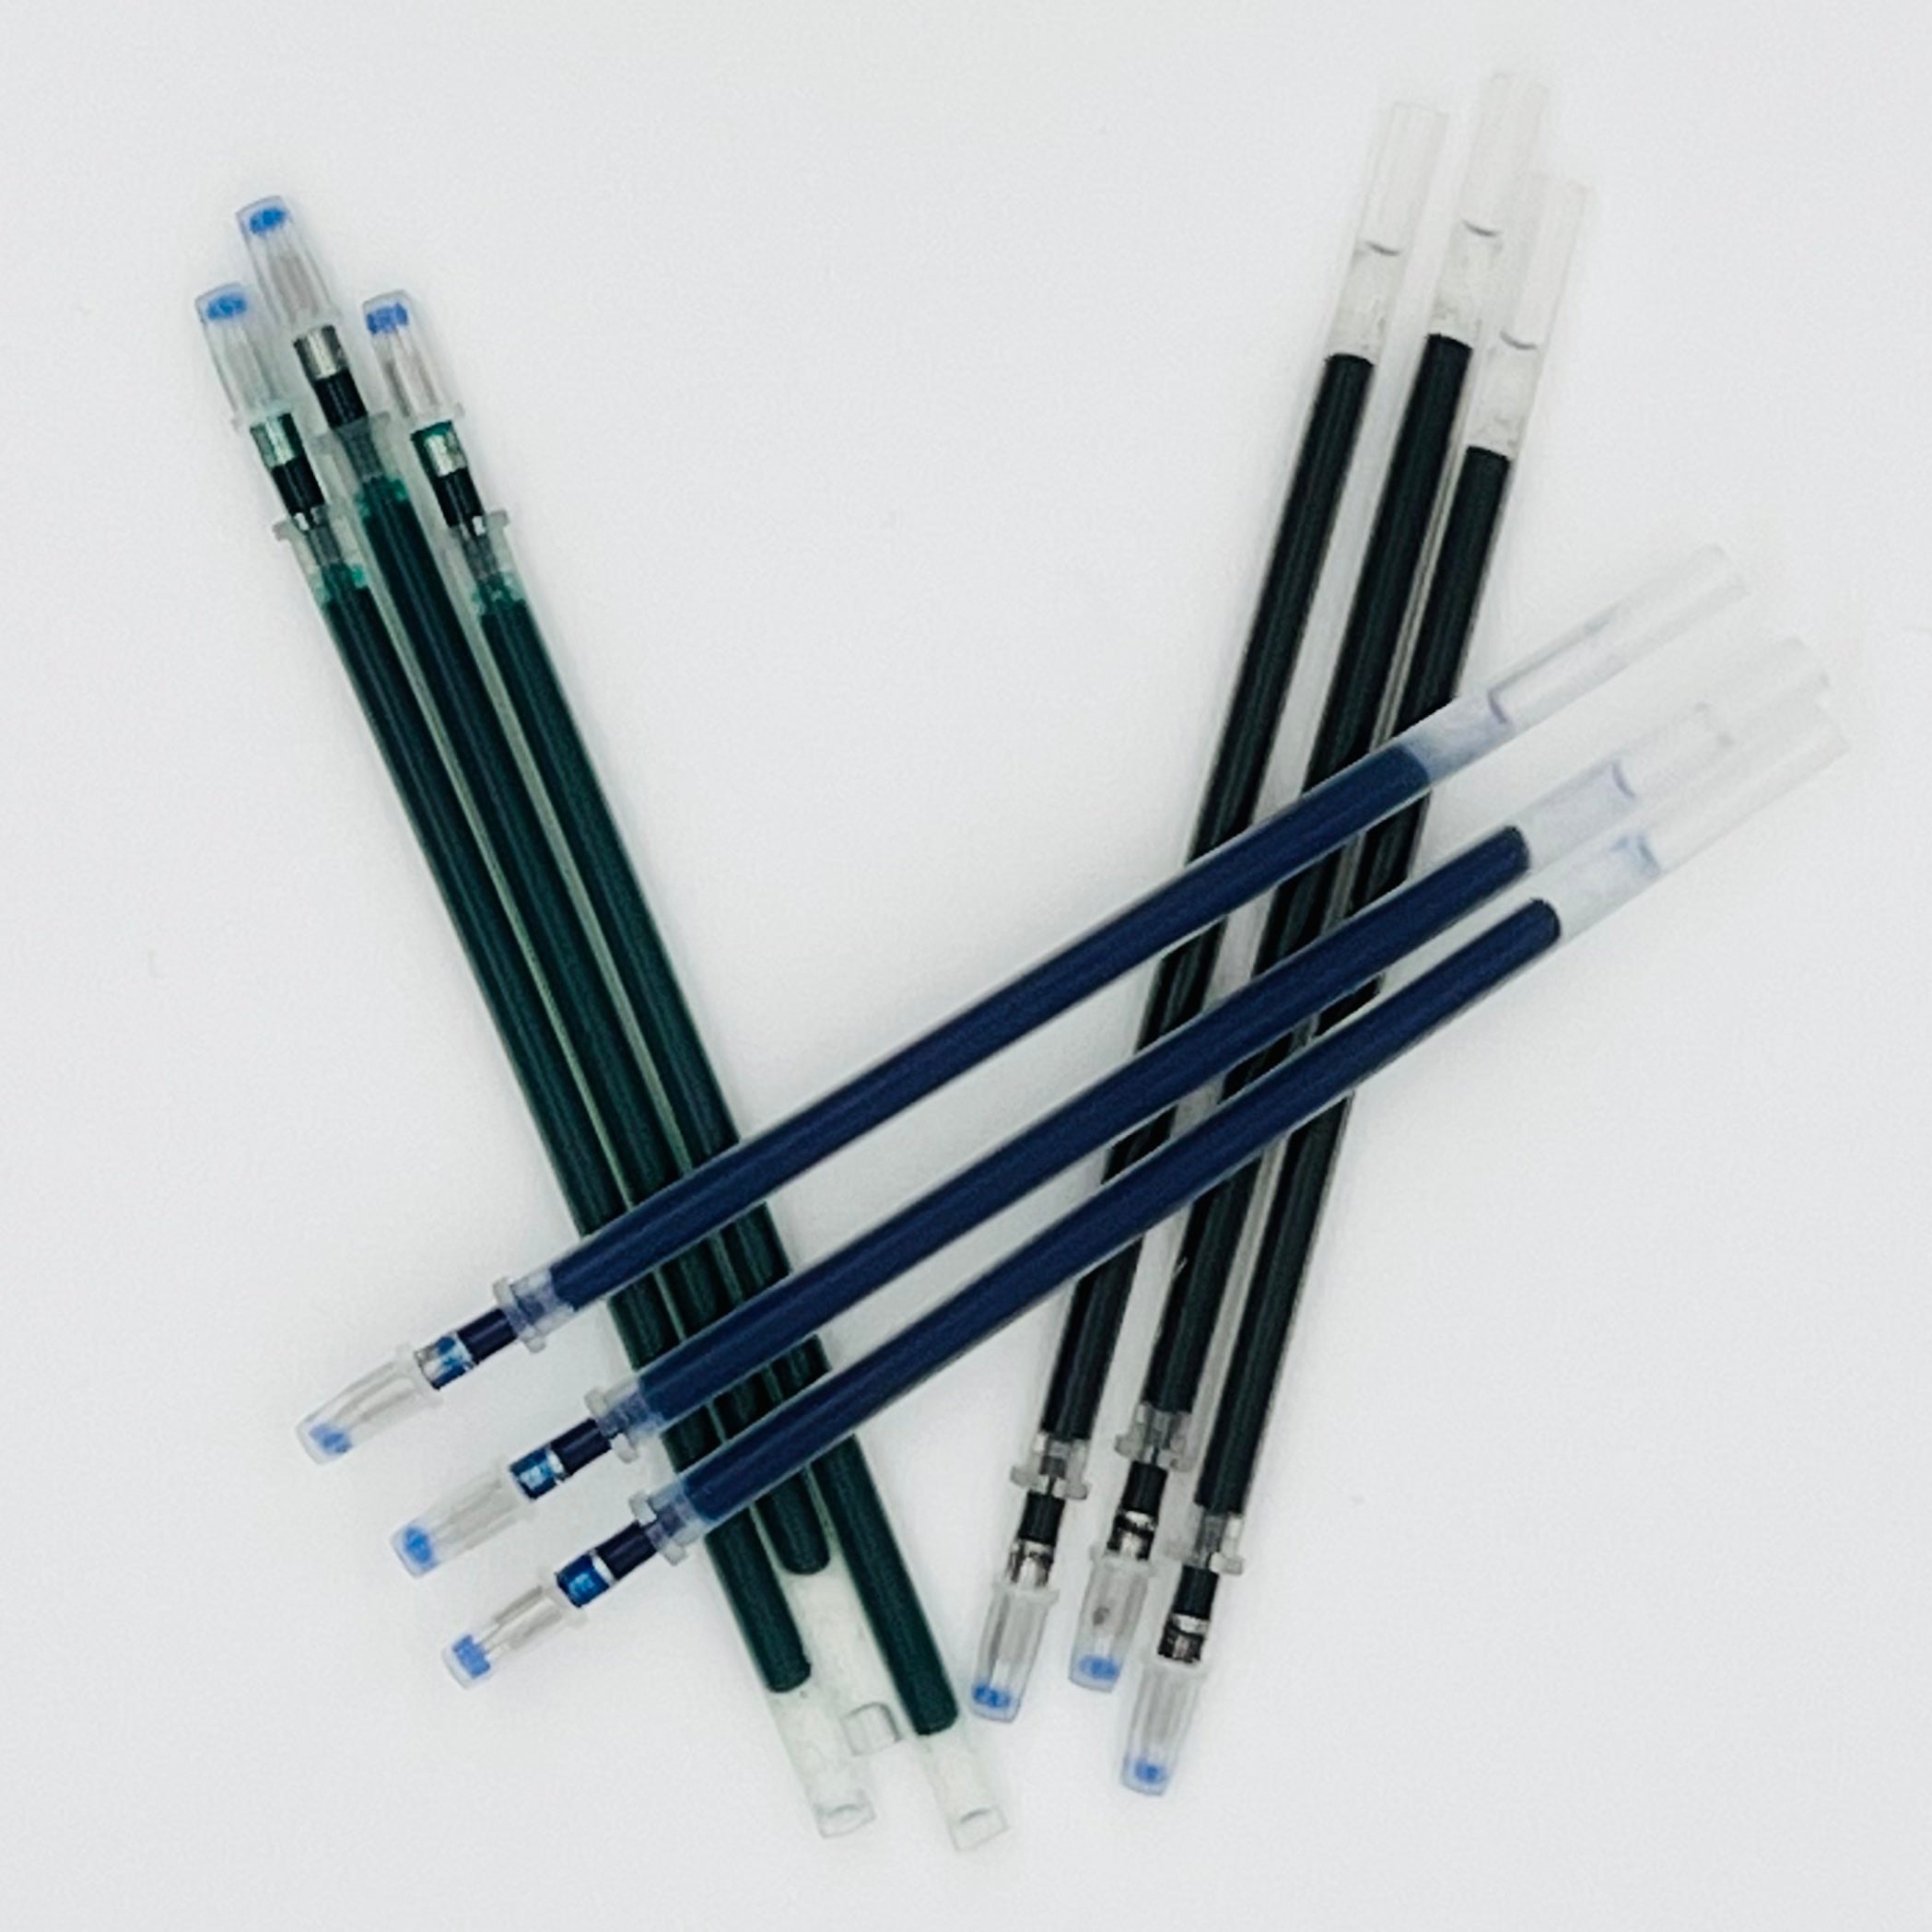 Green, blue, and black ink refills